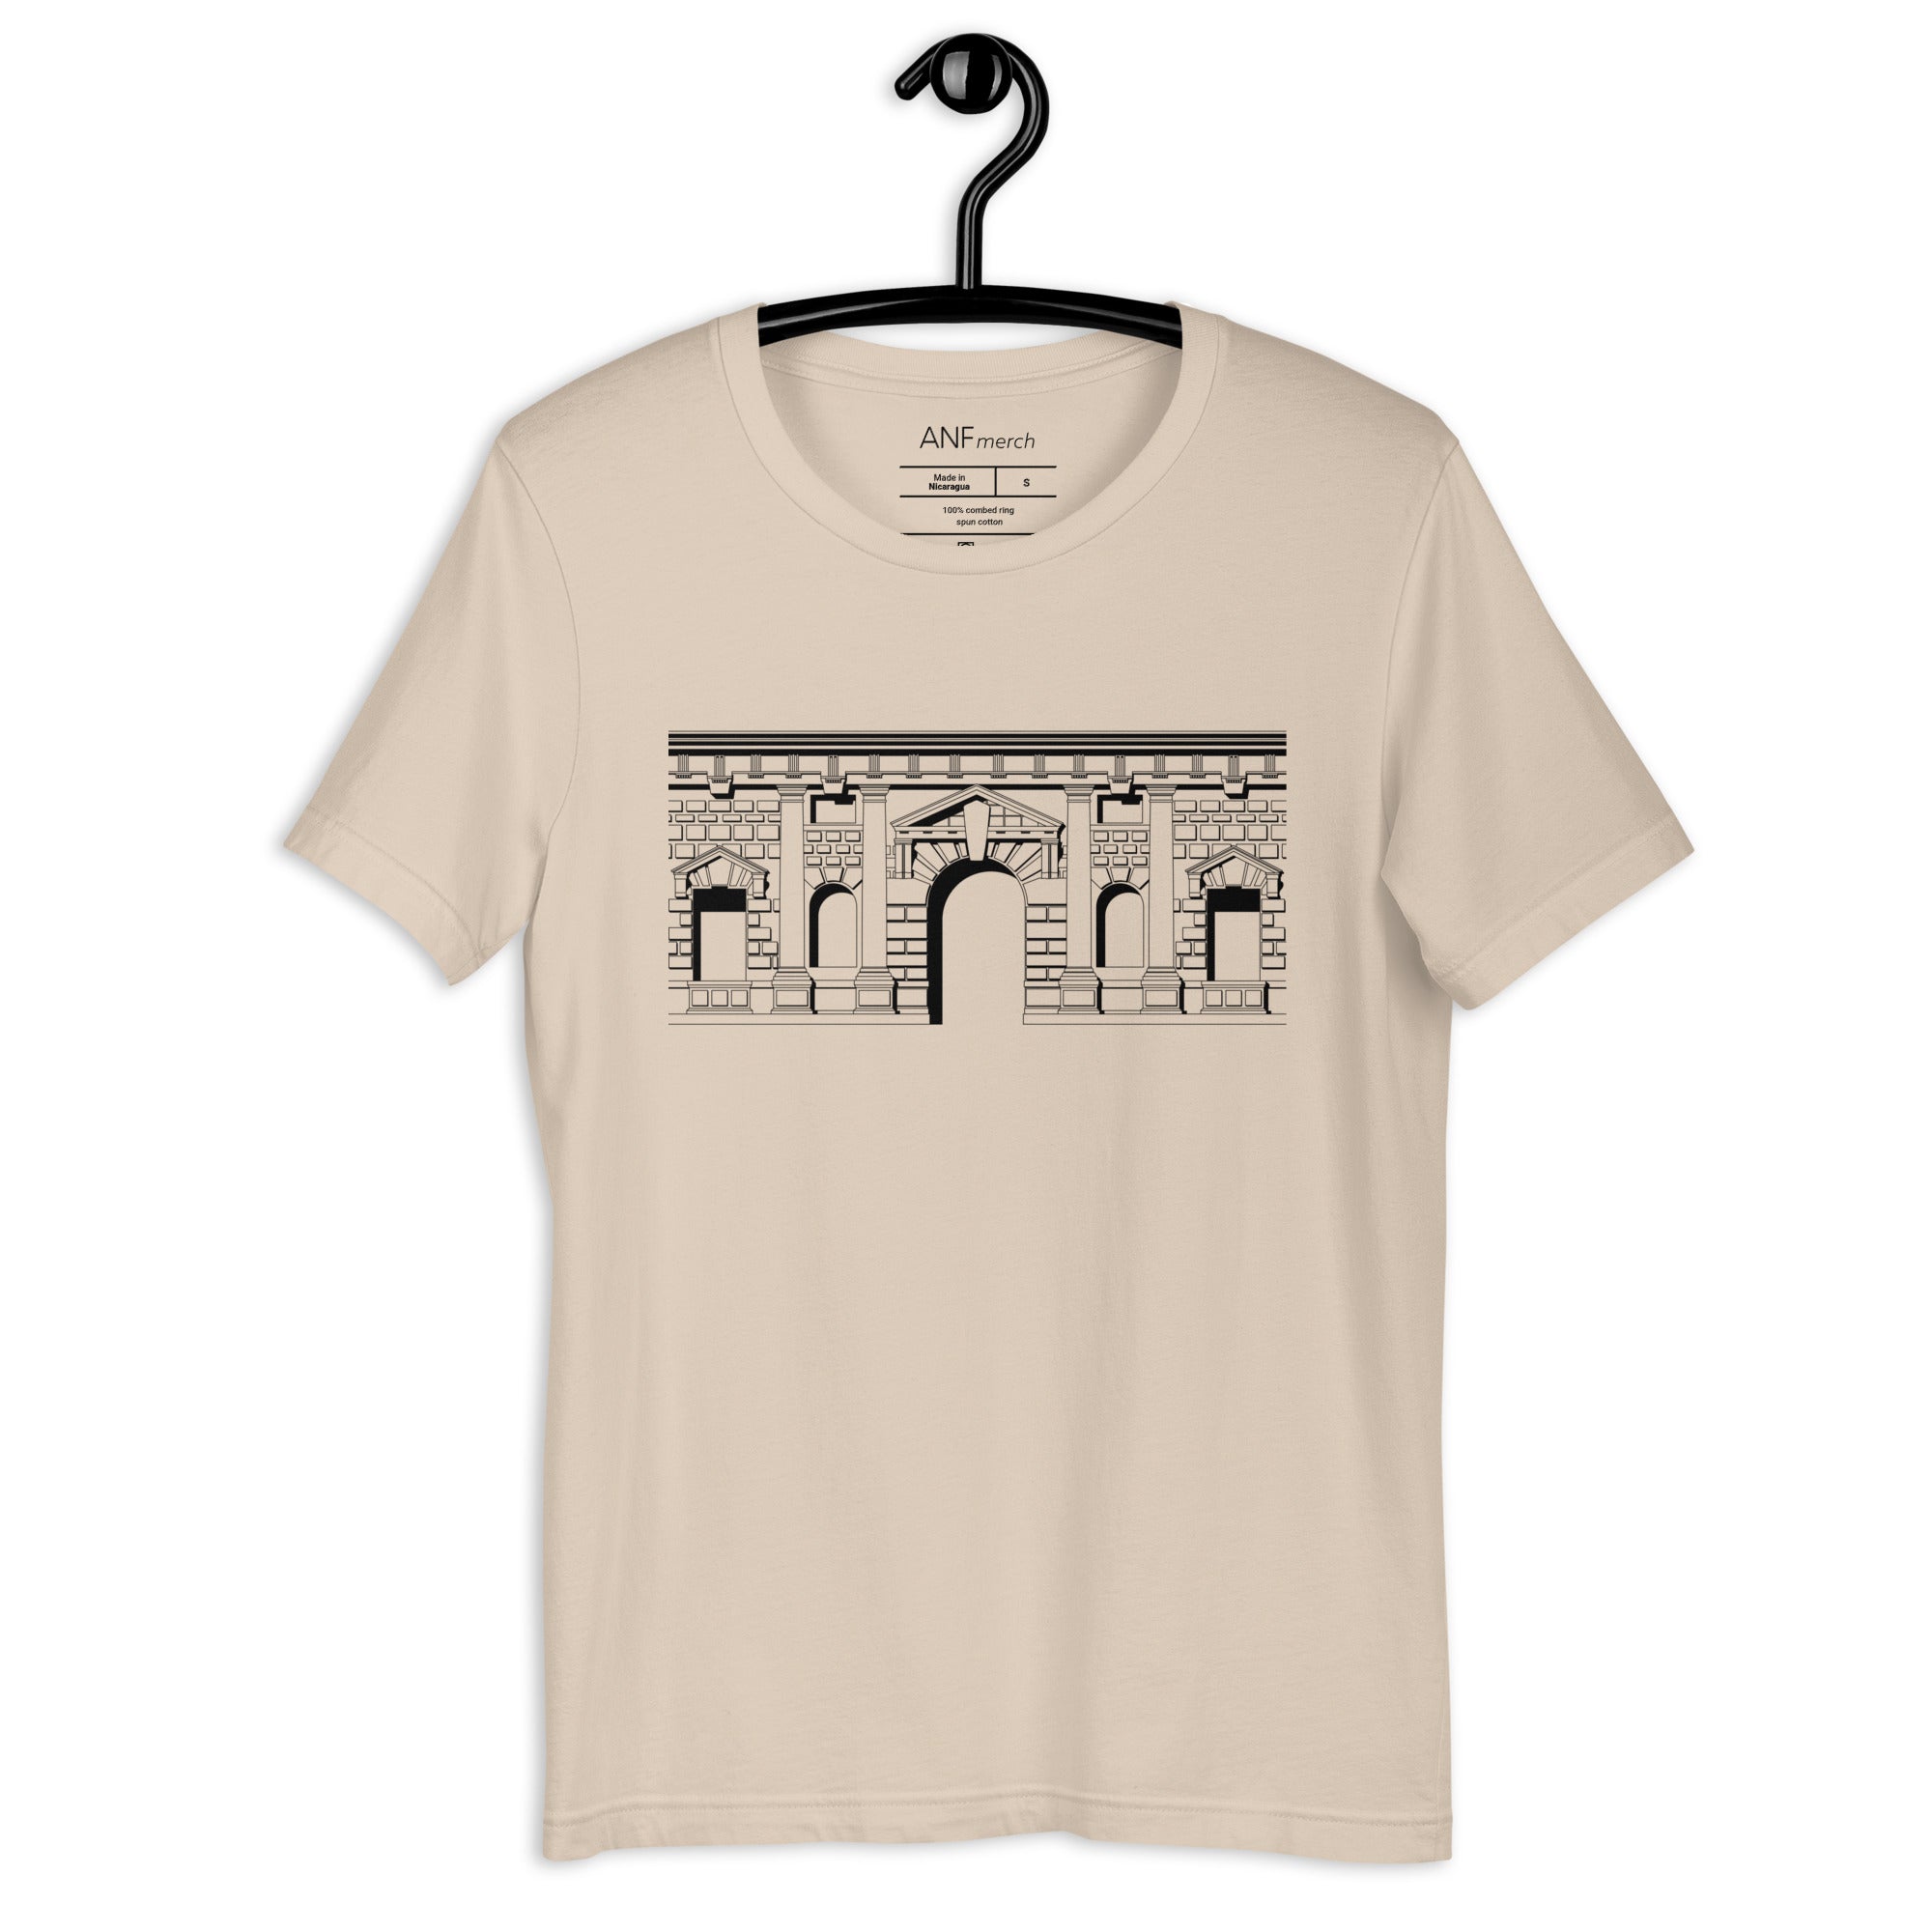 Palazzo Del Te Front-and-Back T-Shirt